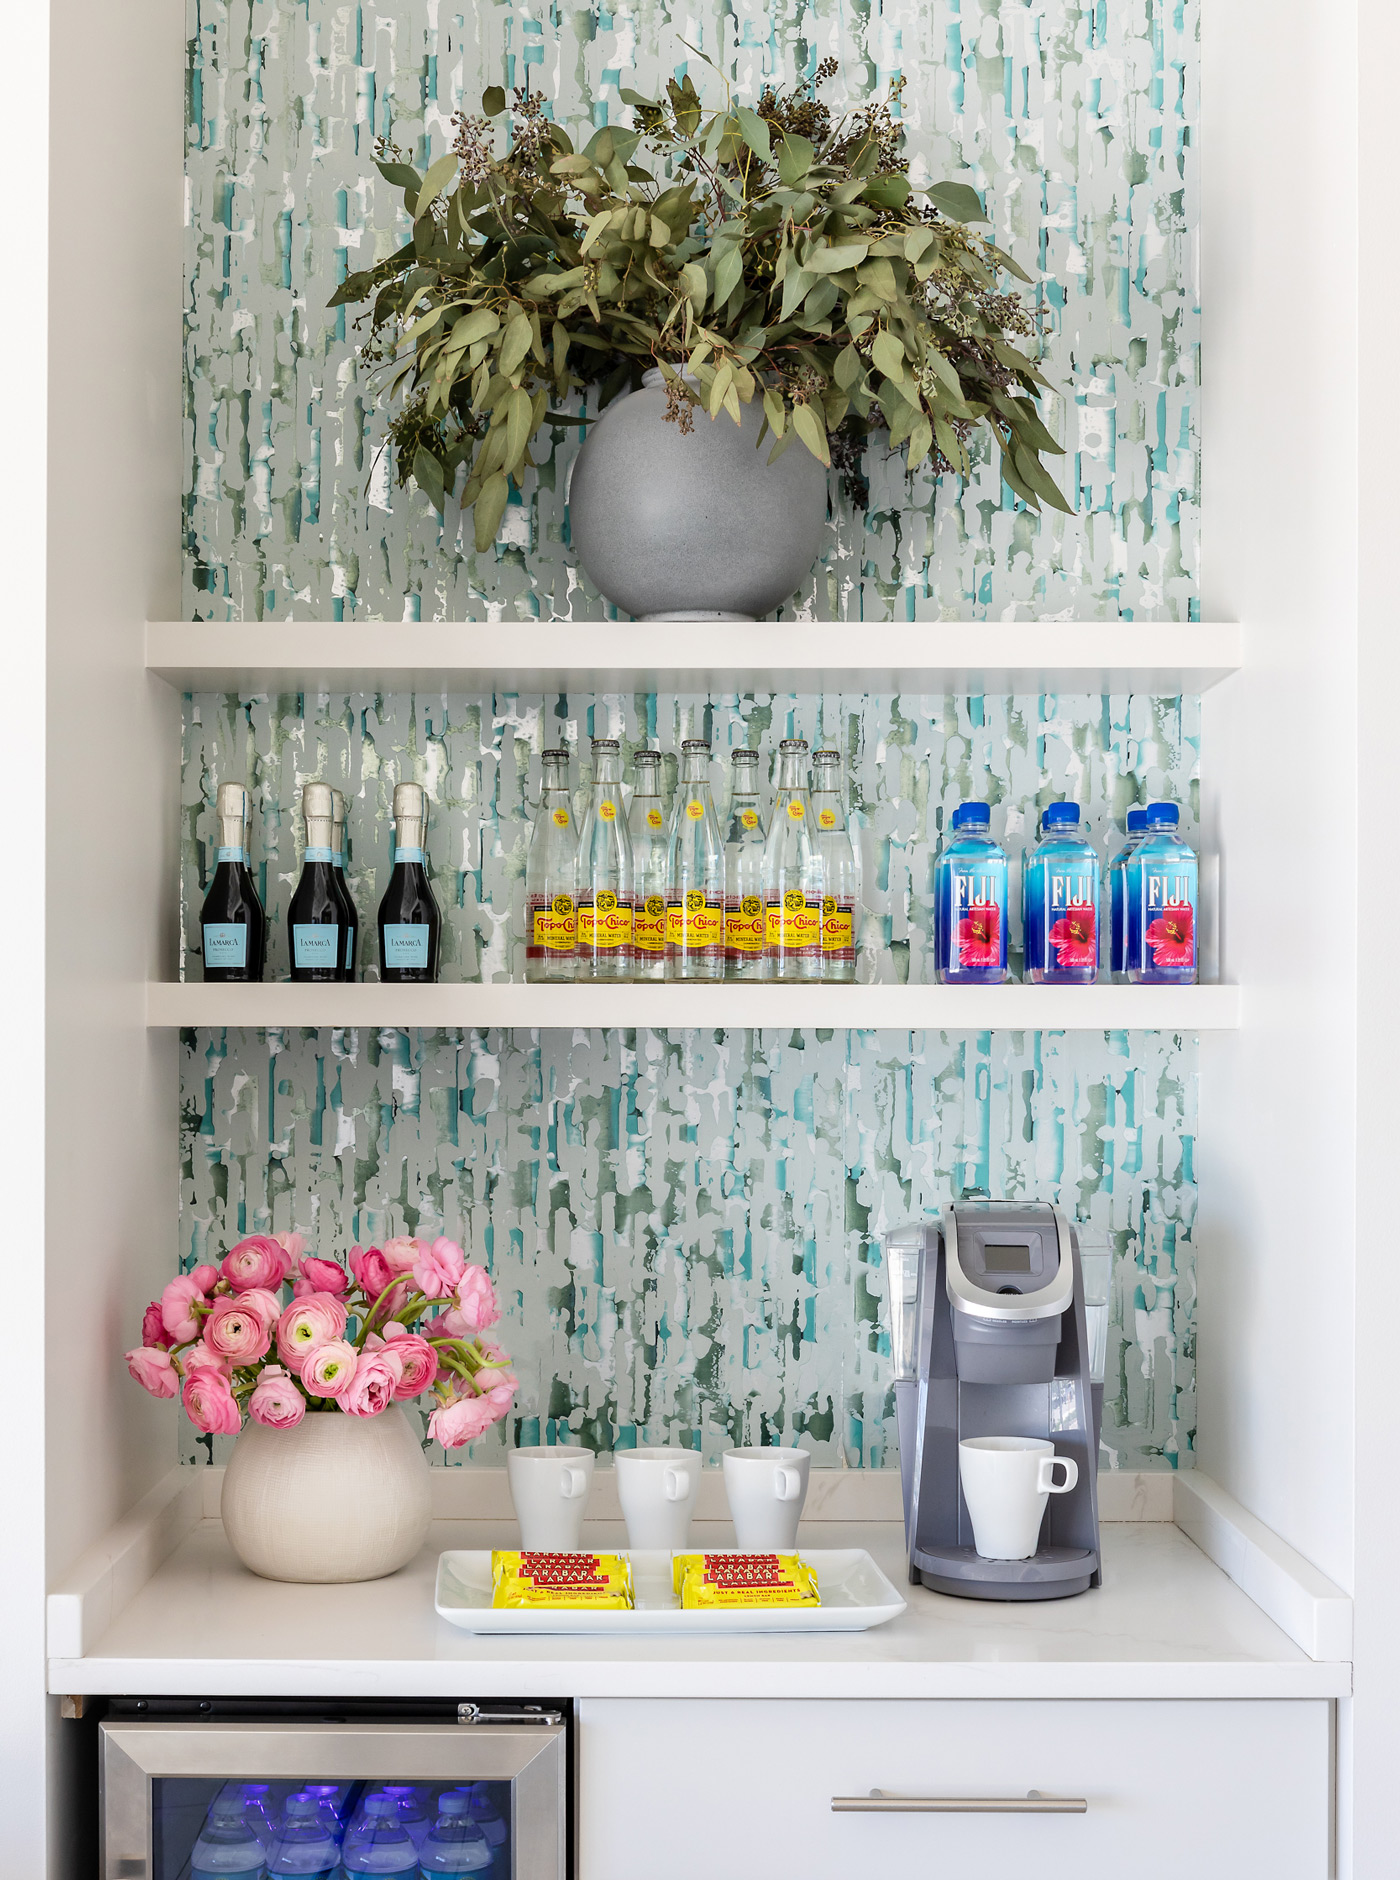 styled refreshment bar at Hello Smooth Med spa, taken by Muriel Silva